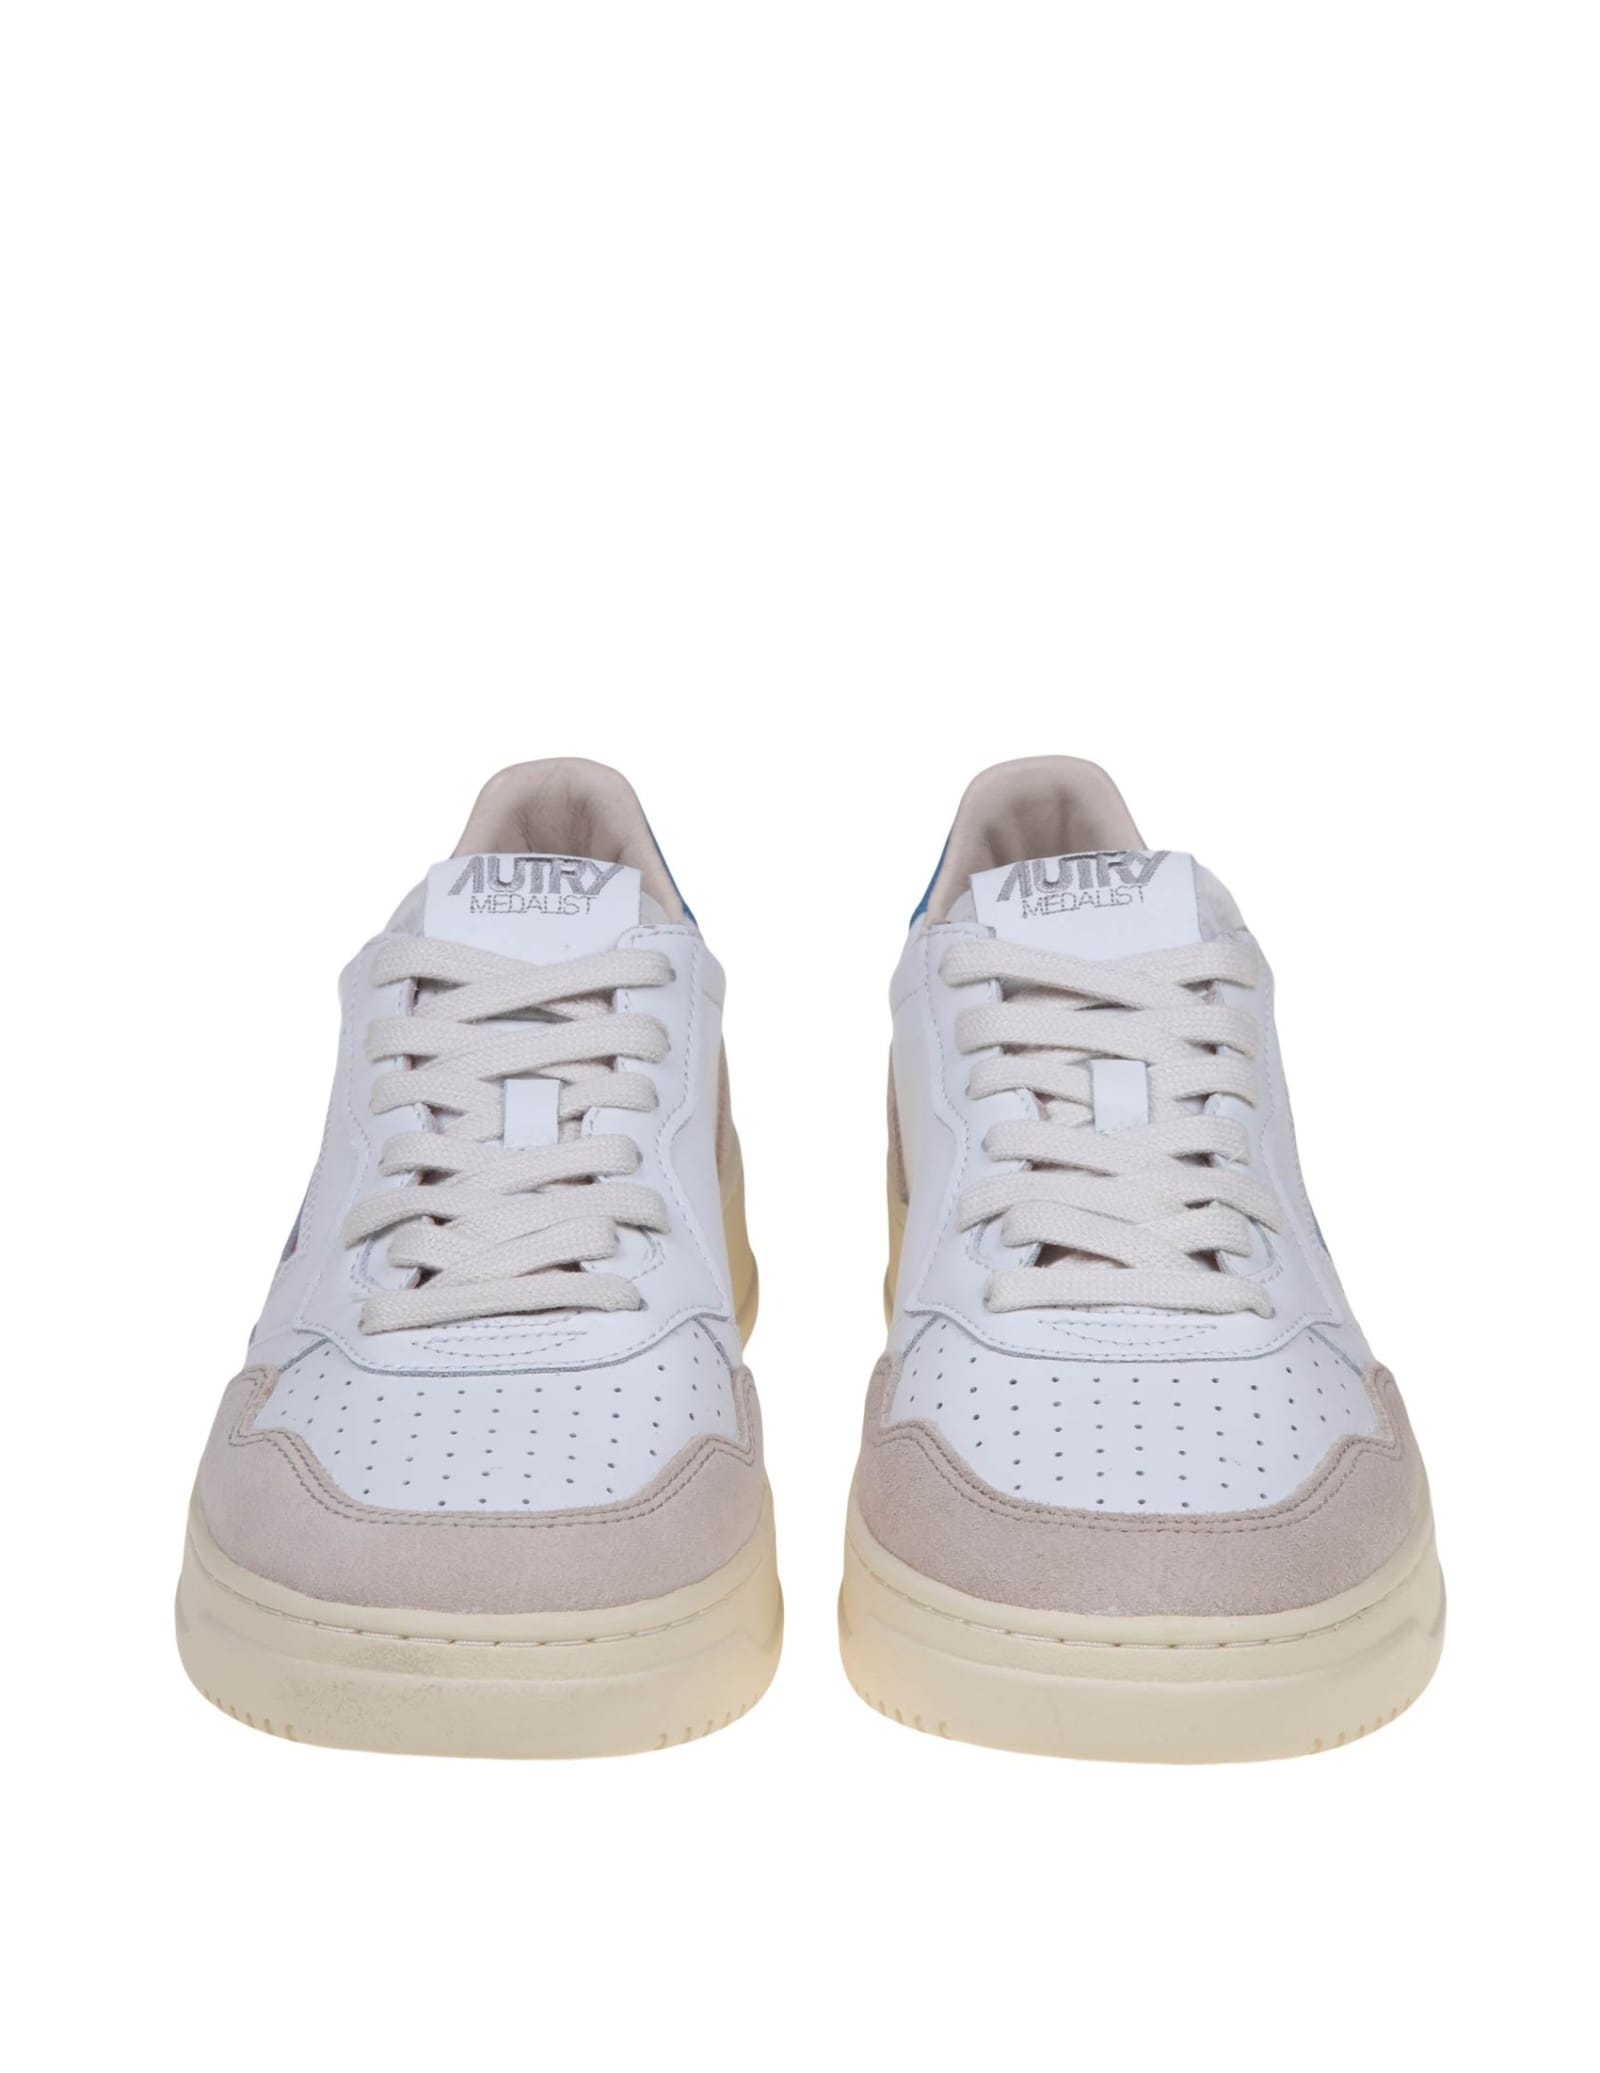 Shop Autry Sneakers In White And Turquoise Leather And Suede In Clear Blue